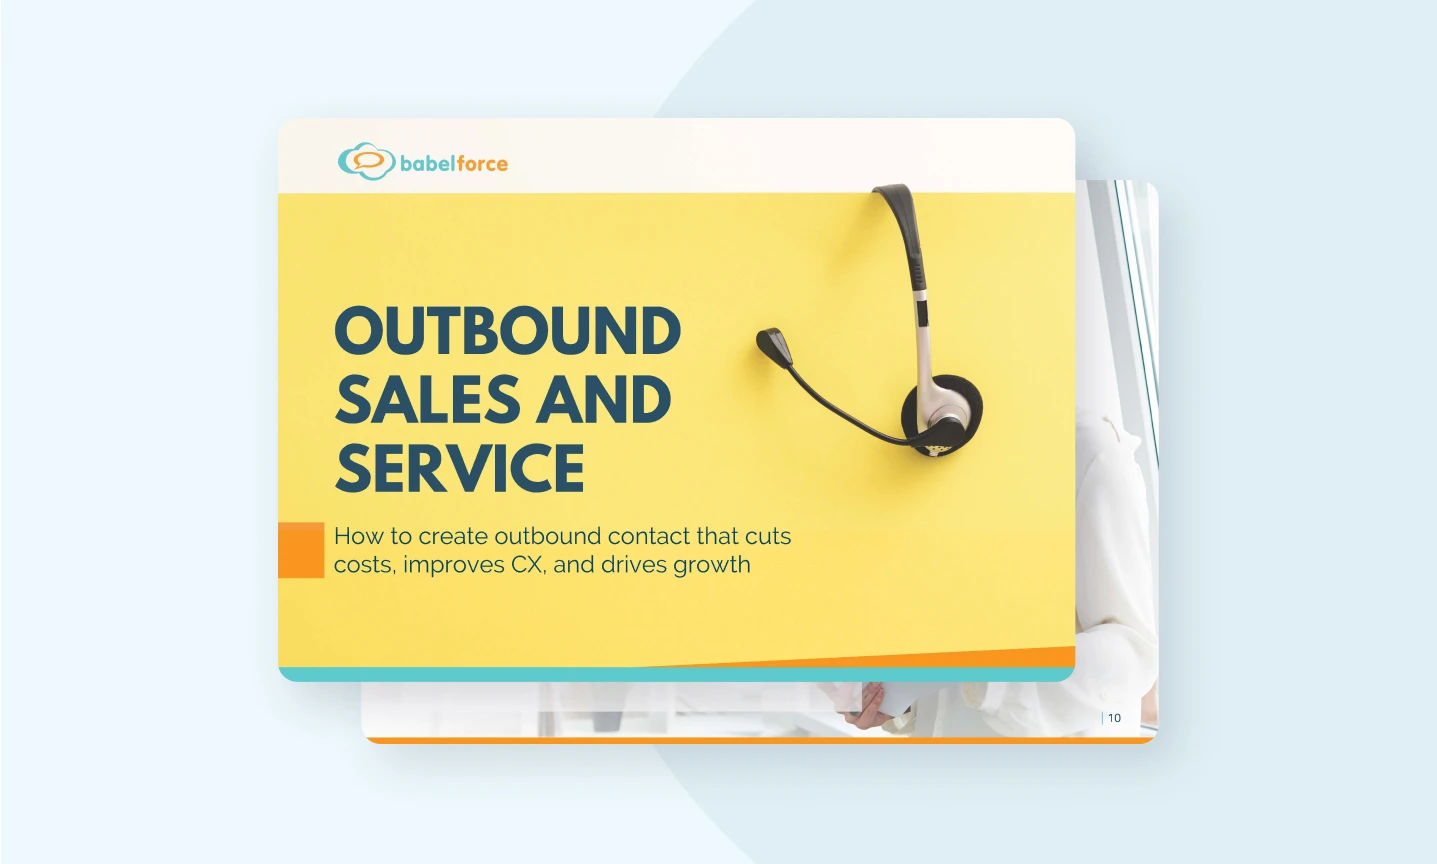 Outbound sales and service